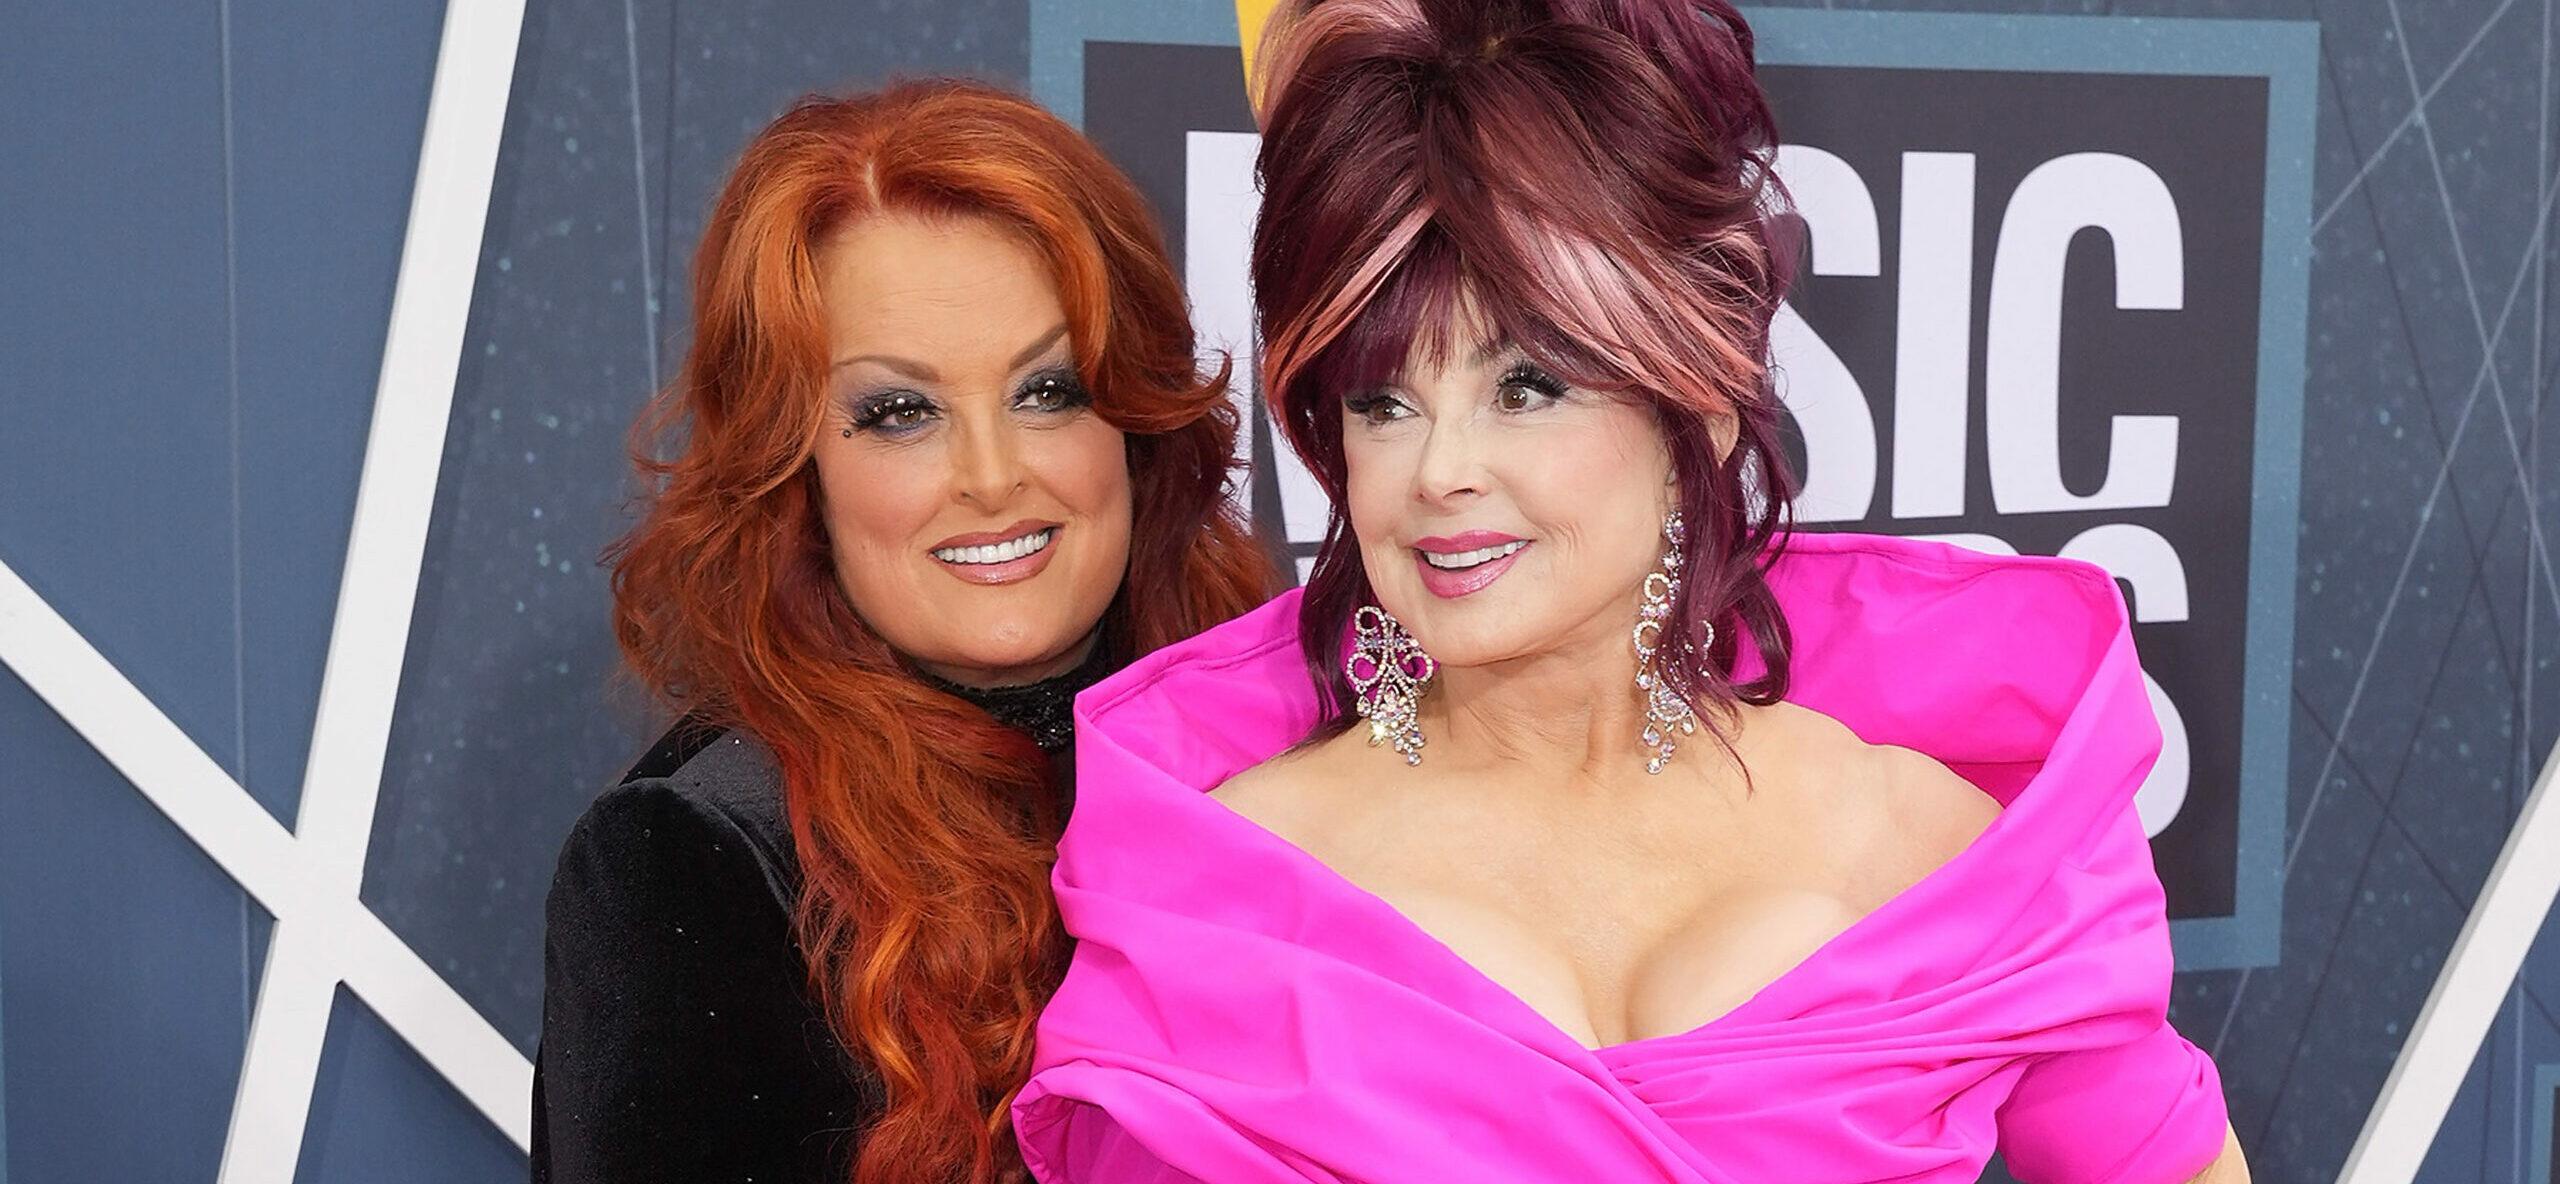 Attorneys Suggest Reasons Why Naomi Judd May Have Left Daughters Out Of Her Will